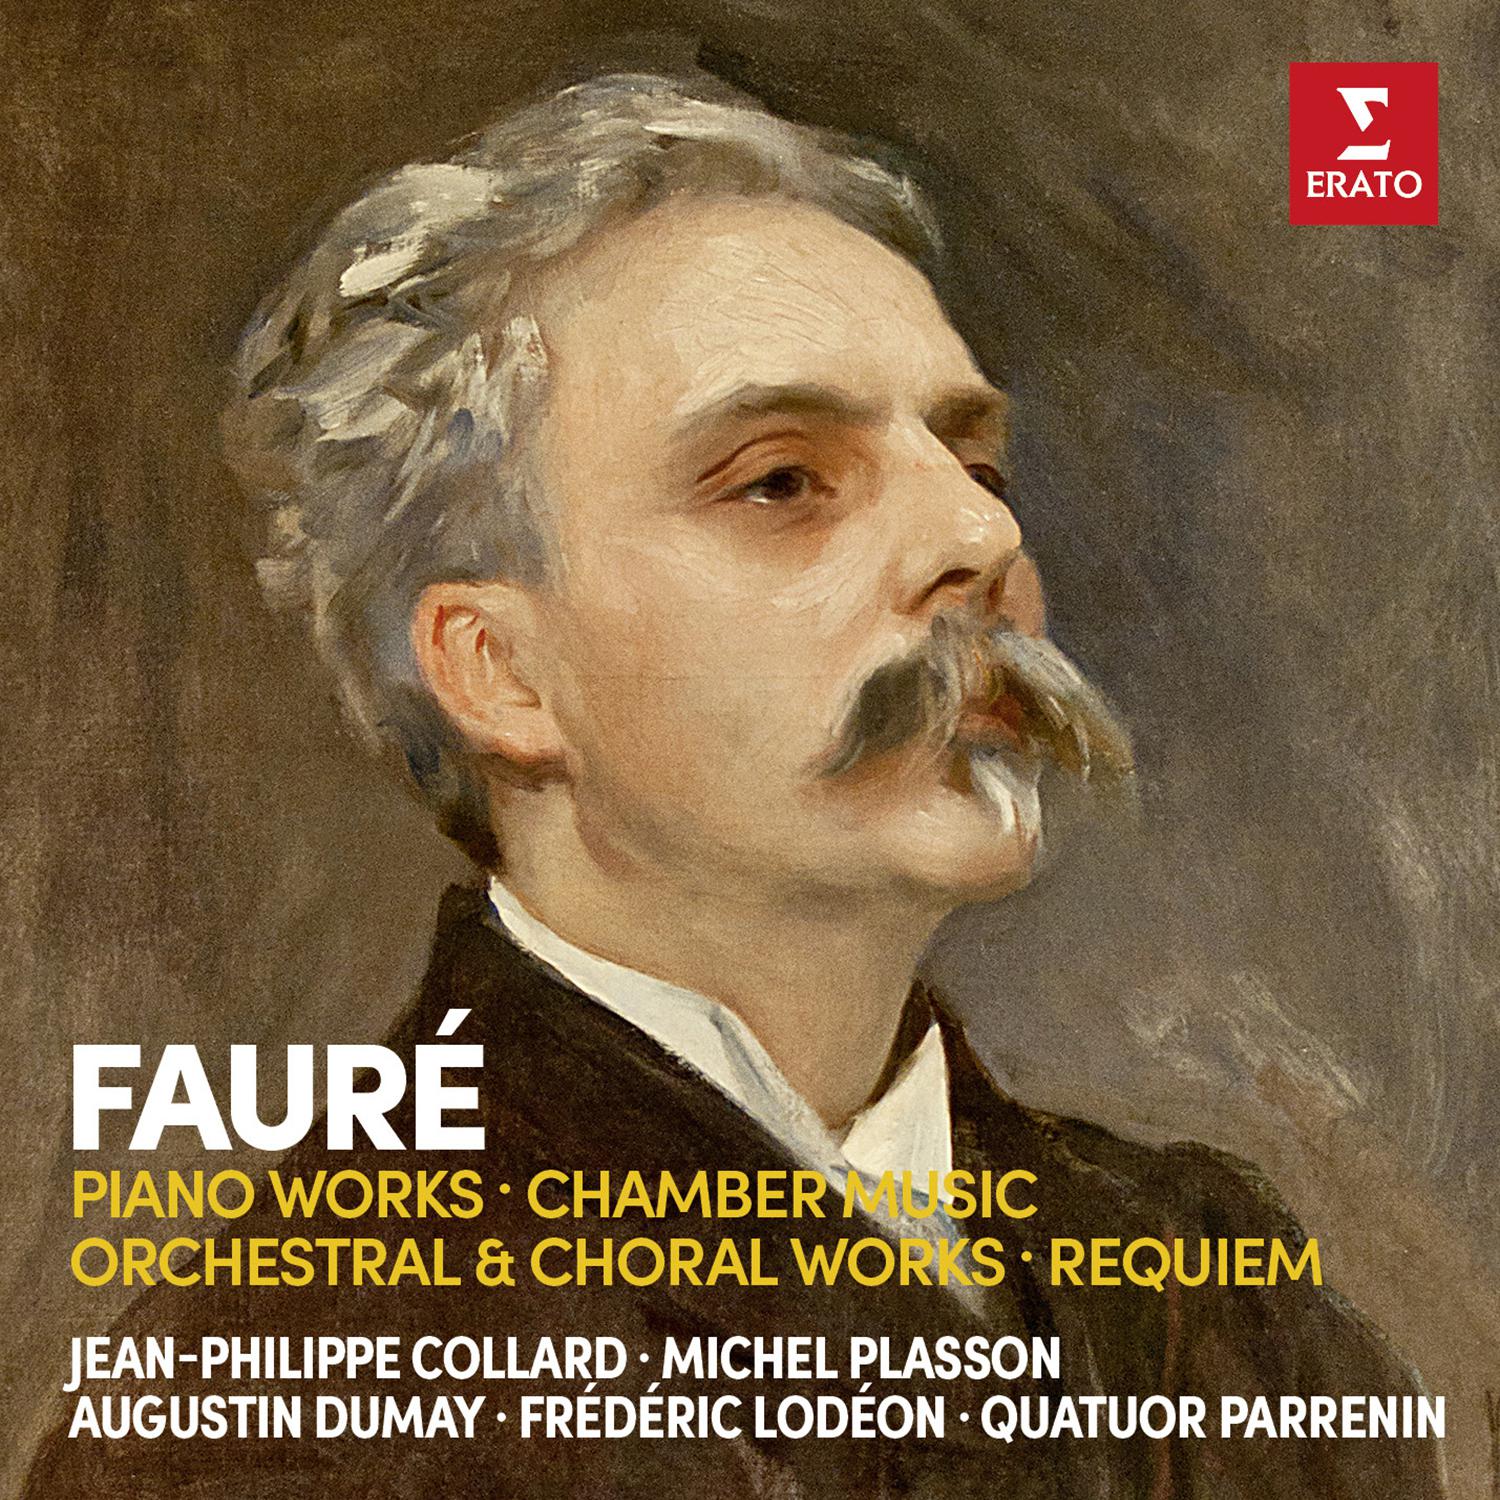 Faure: Piano Works, Chamber Music, Orchestral Works  Requiem